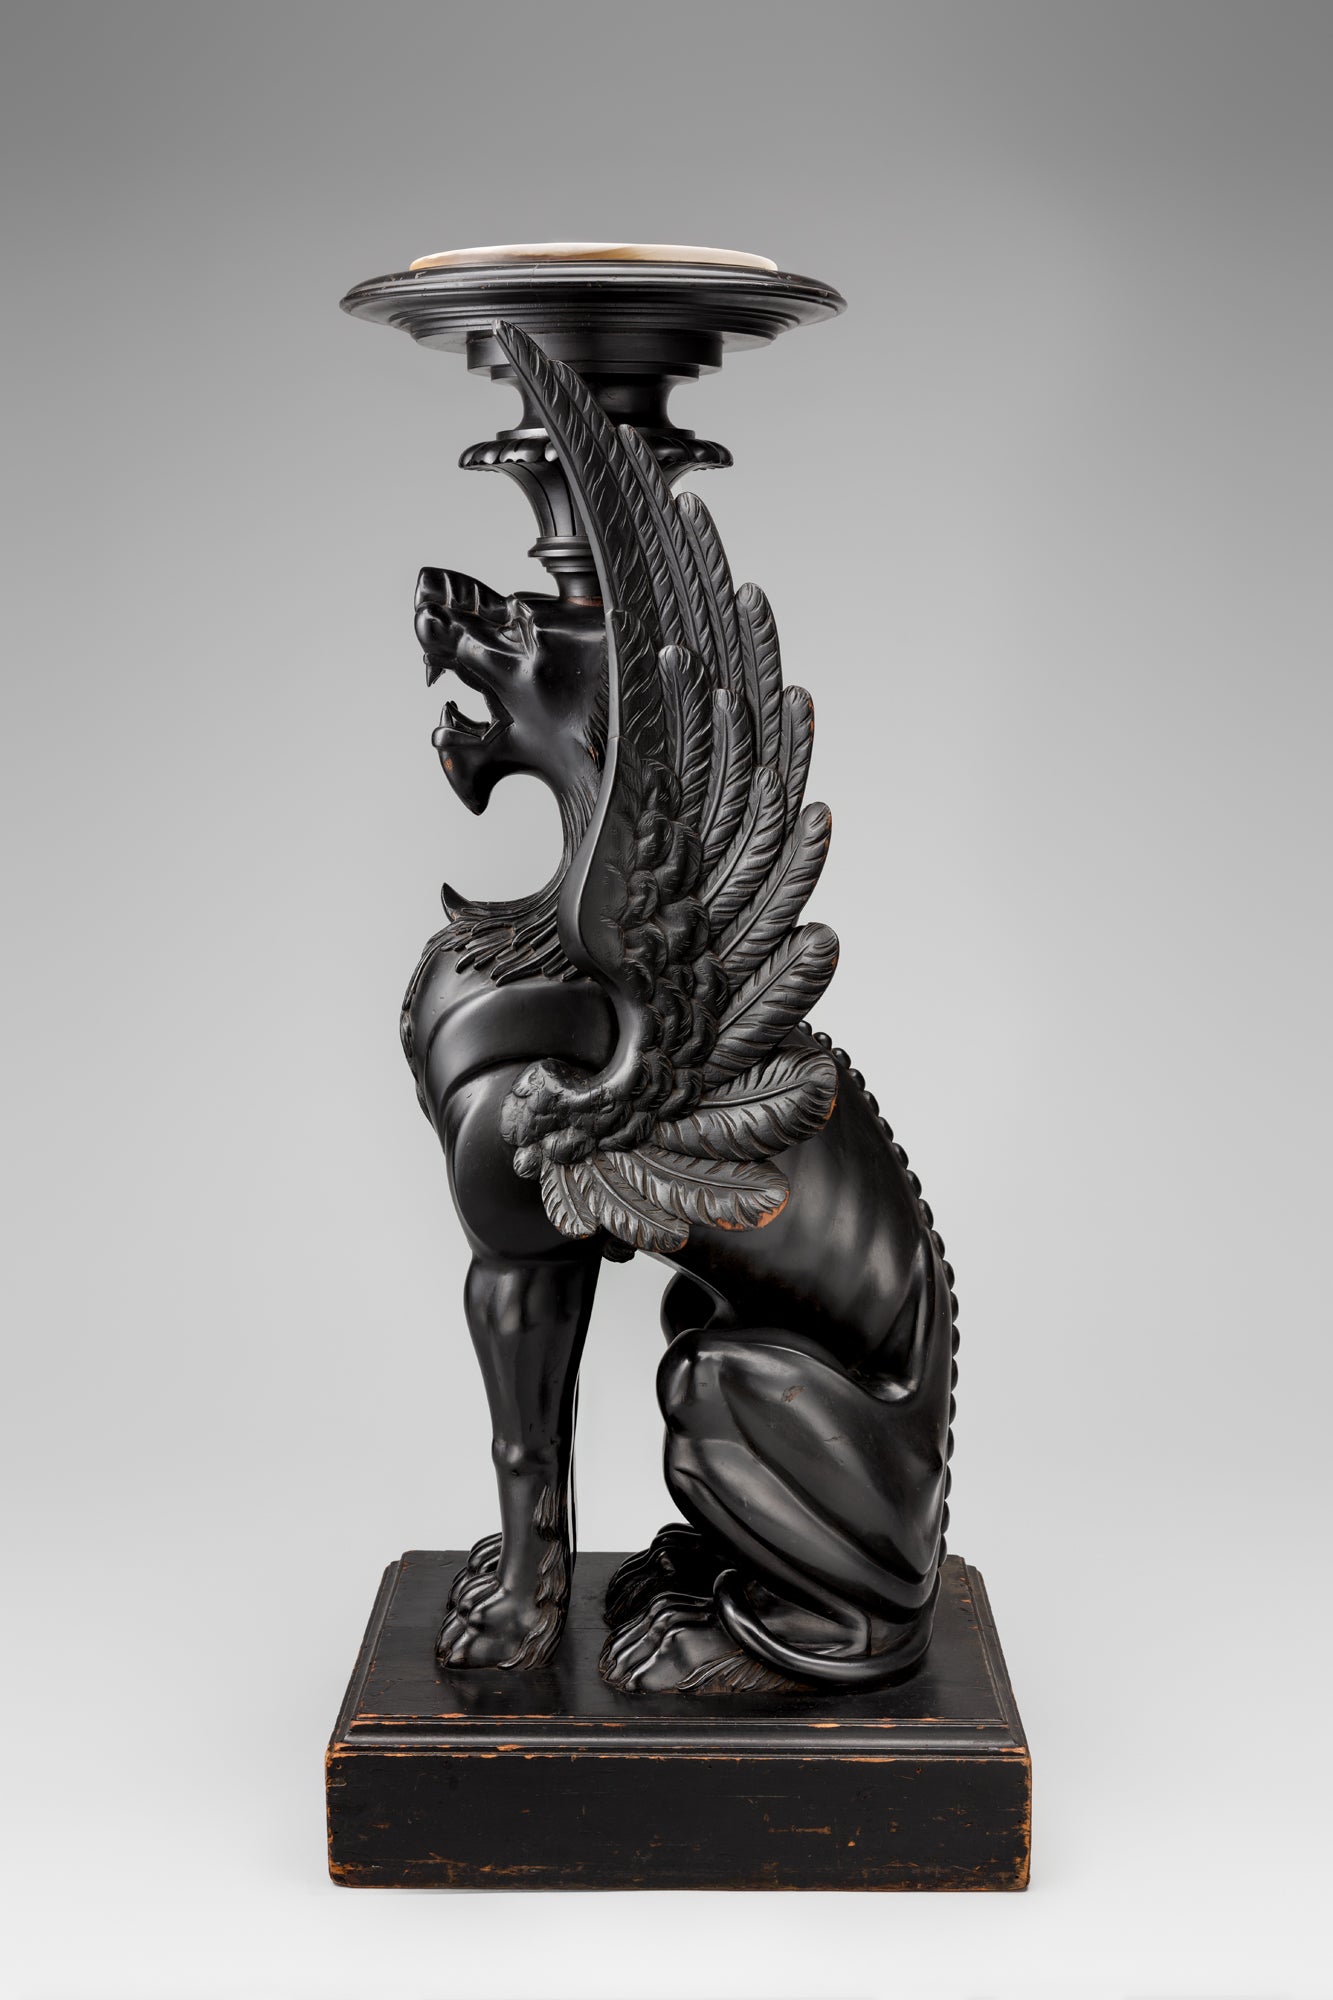 Griffin pedestal  c. 1870s–80s unknown maker possibly New York ebonized wood Courtesy of Michaan’s Auctions, Alameda, CA L2019.0102.002